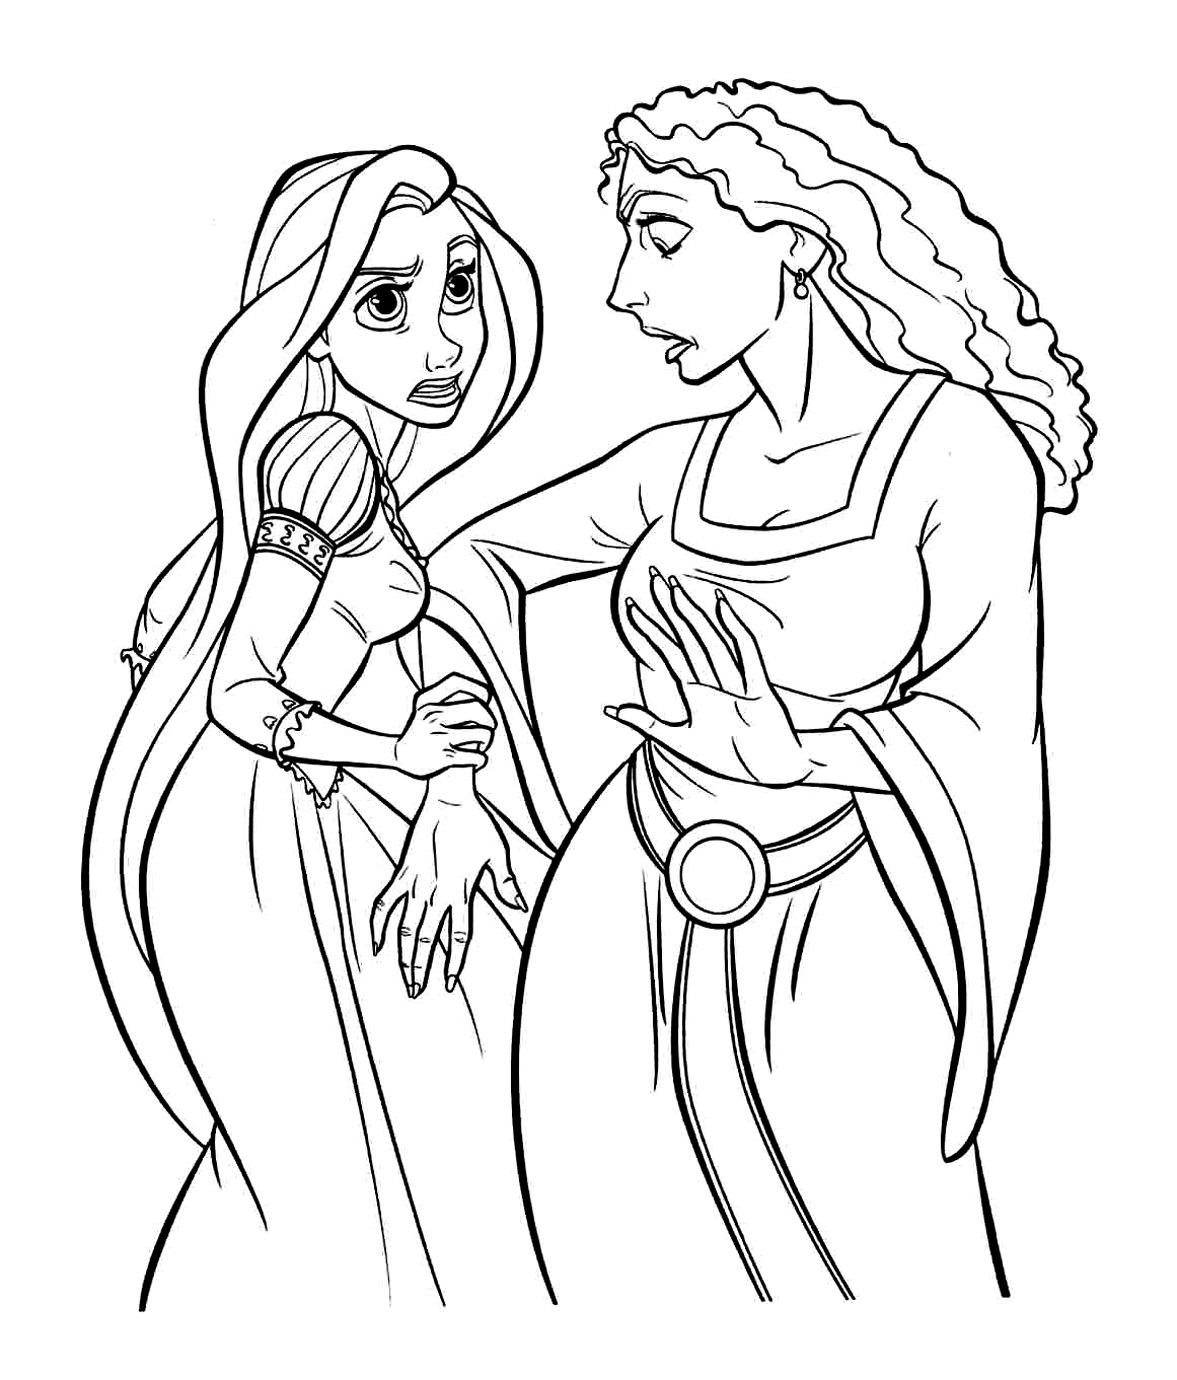 Simple Tangled coloring page for children : Mother Gothel with Rapunzel